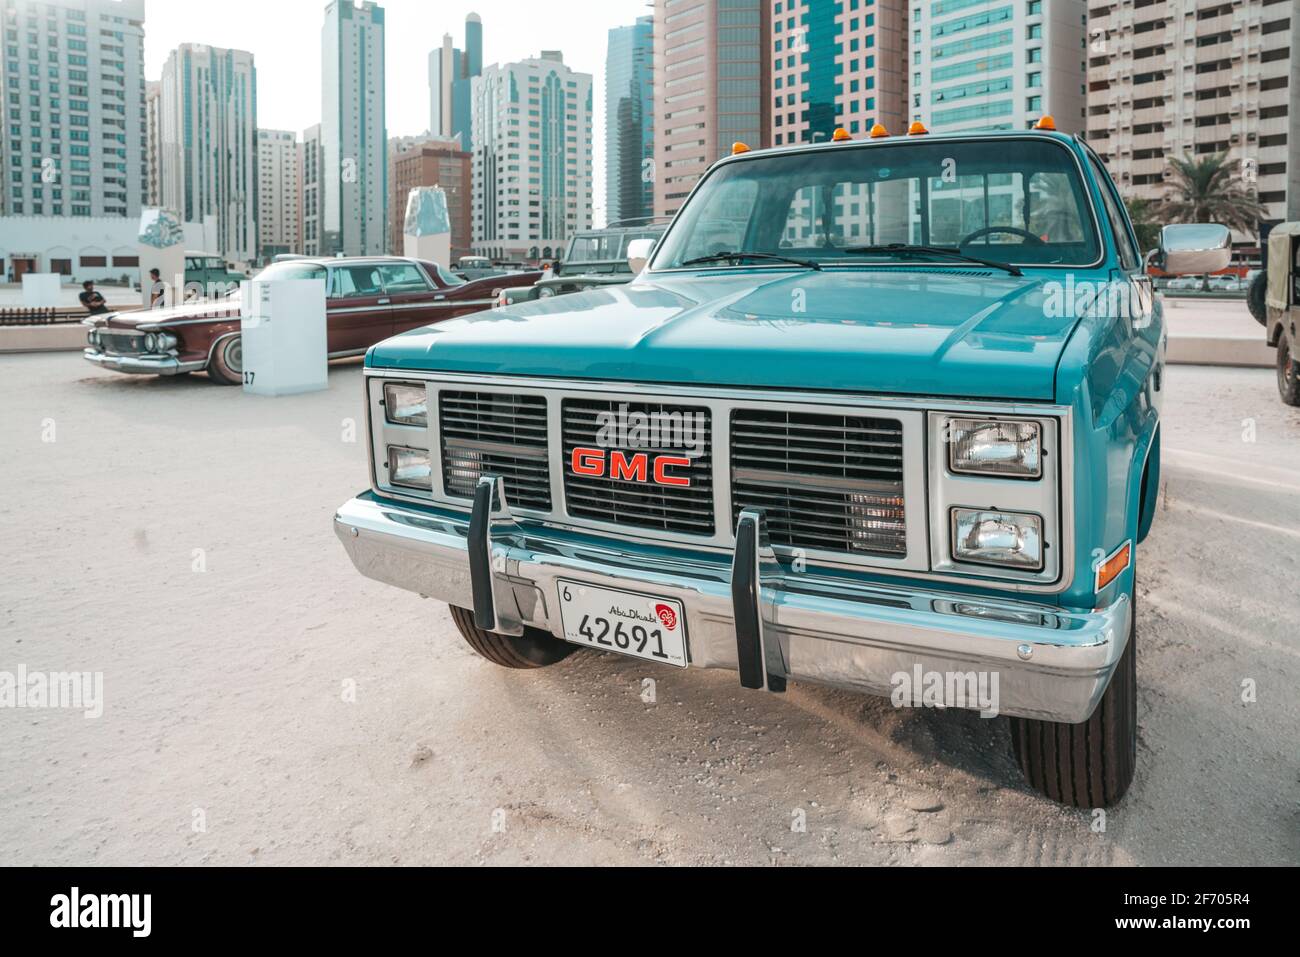 Classic GMC pickup truck automobile displayed in Abu Dhabi, UAE |  American sports car | vintage style and design Stock Photo